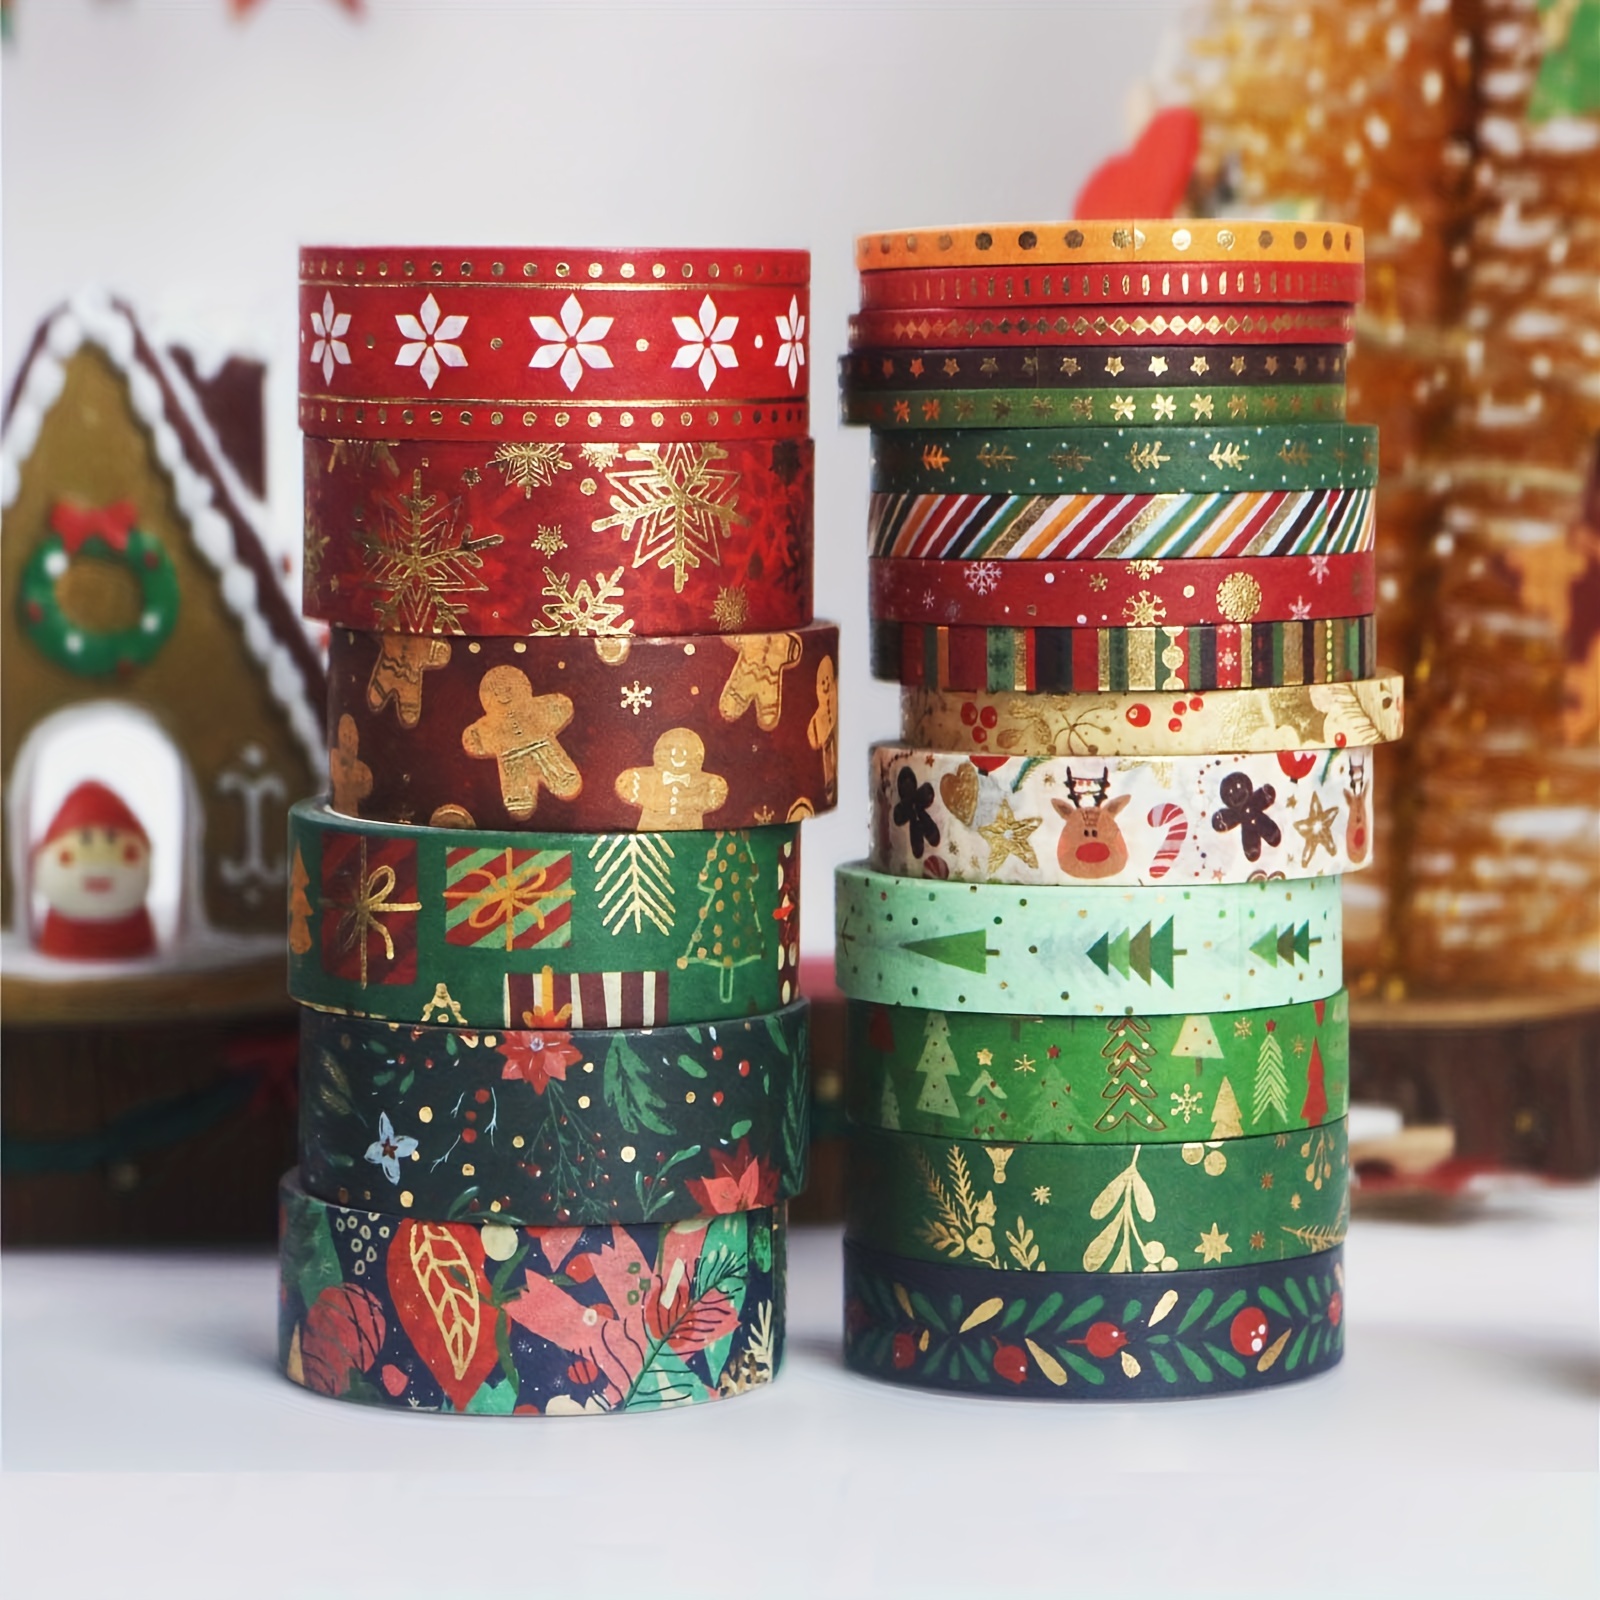 8 Rolls Christmas Holiday Foil Washi Tape Set with Snowflake Tree Deer  Striped for Journaling Christmas Xmas Decoration